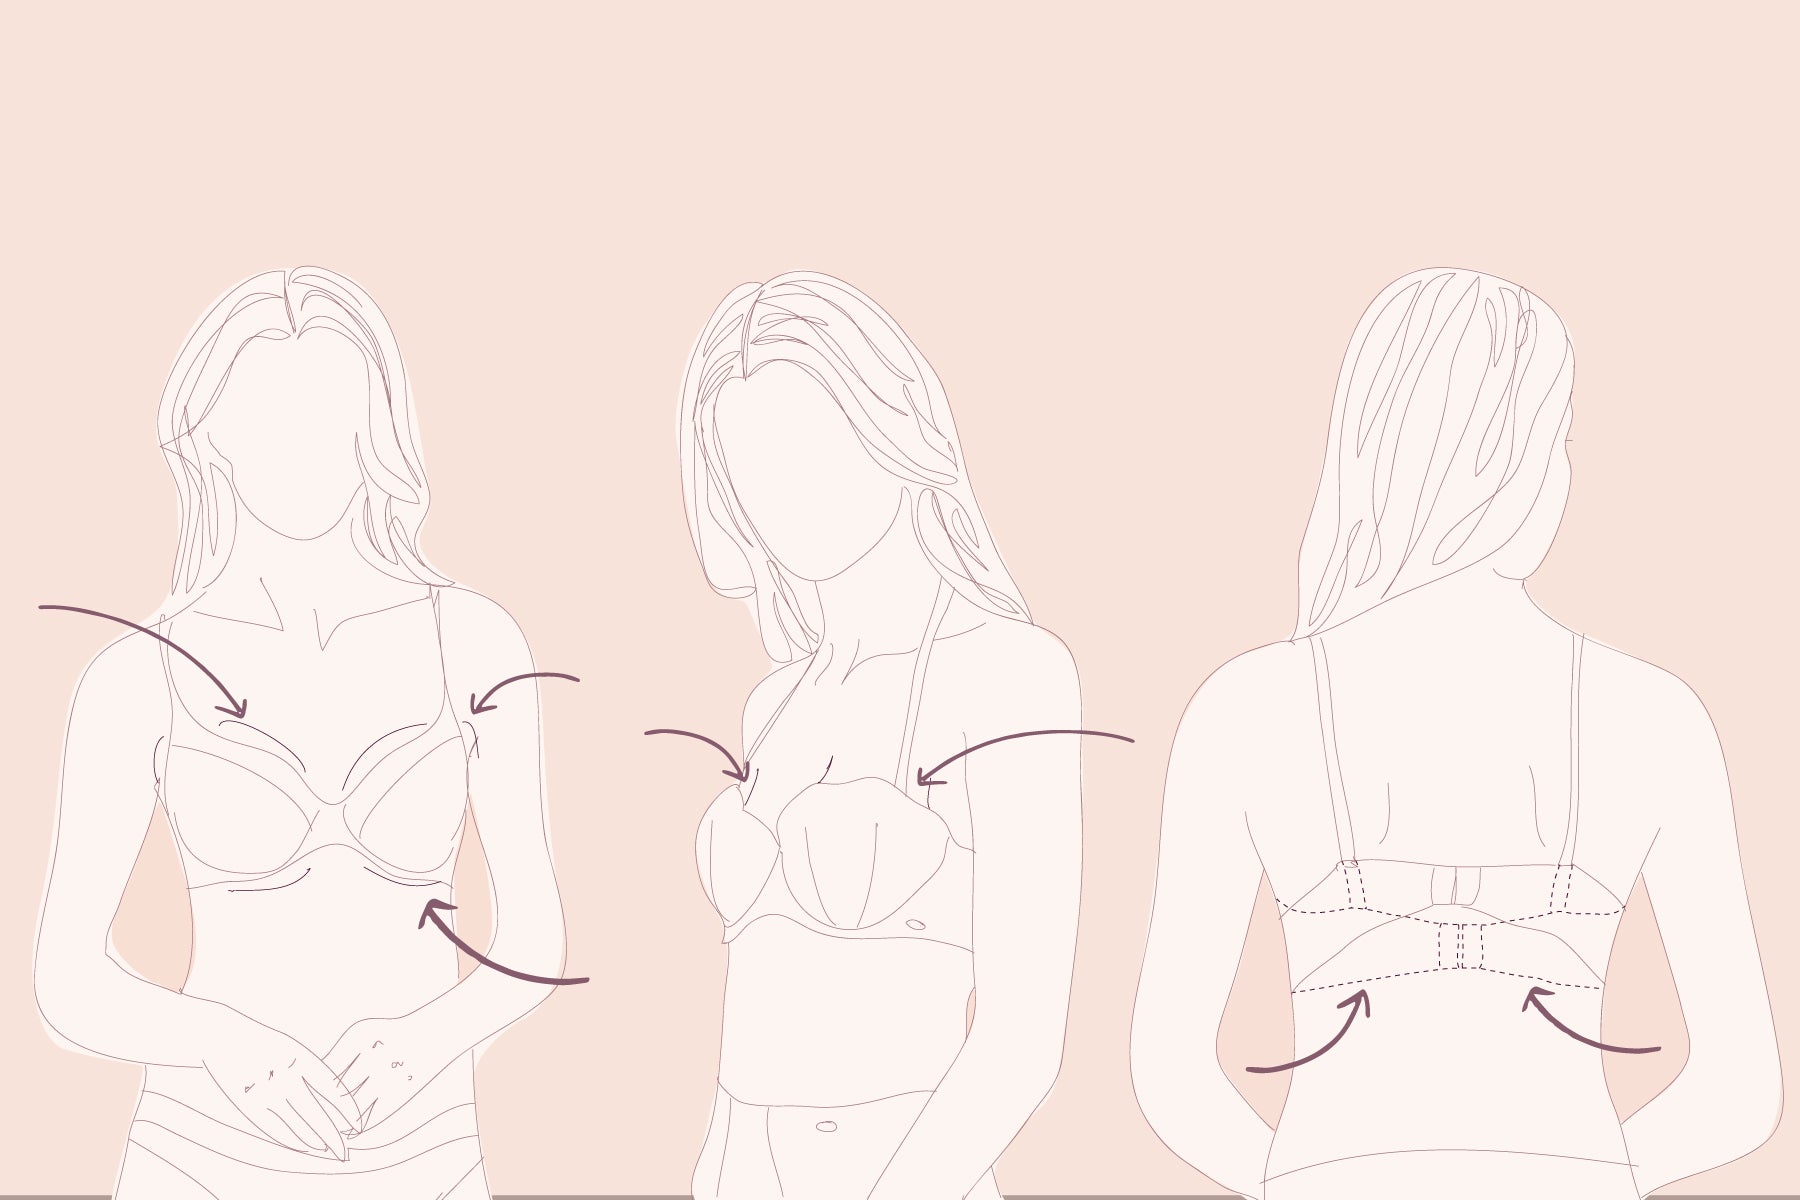 Sketch showing common areas where bras don't fit well